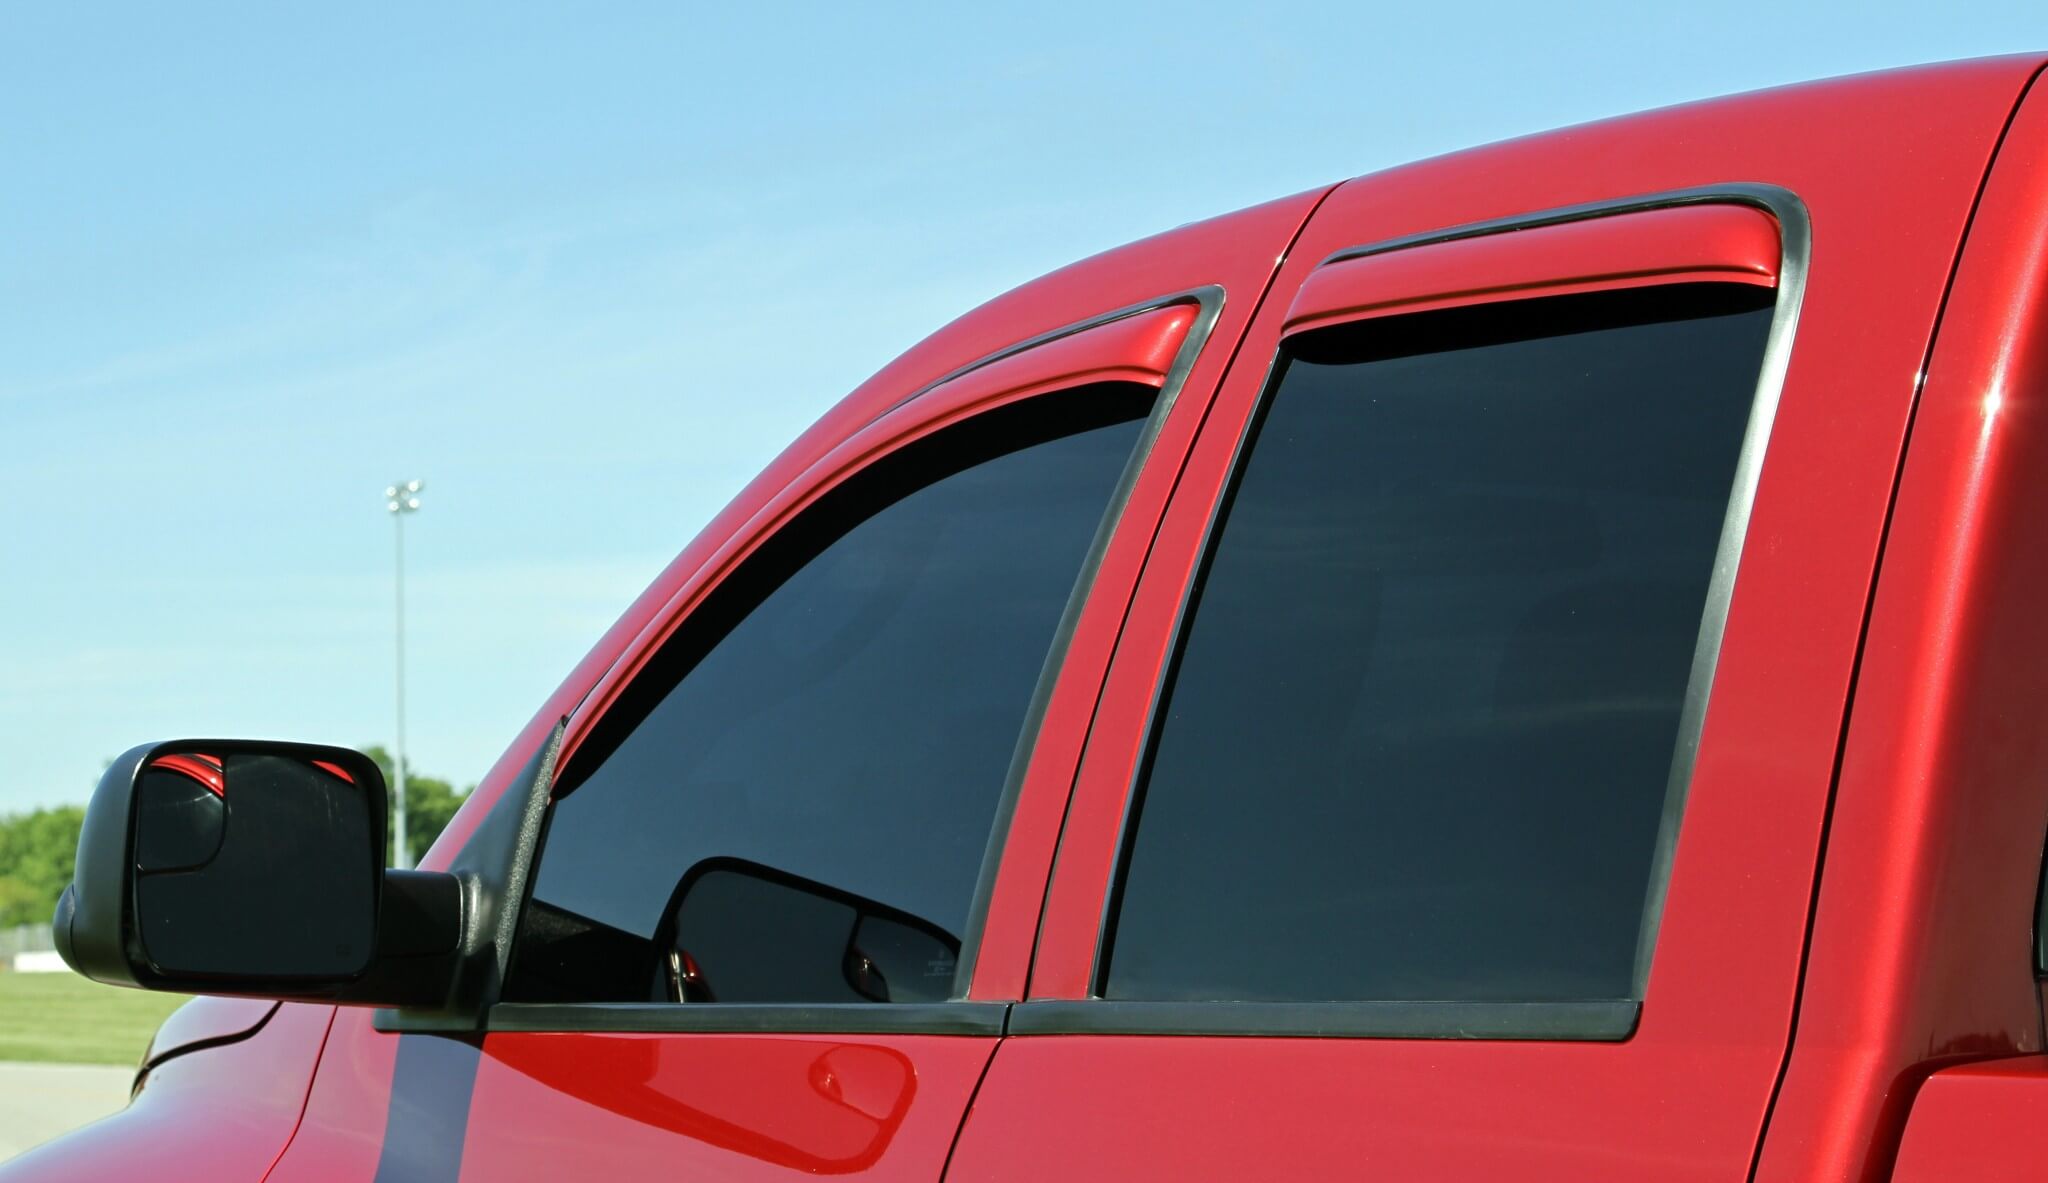 Color-matched vent shades look great on the truck and add another custom touch.